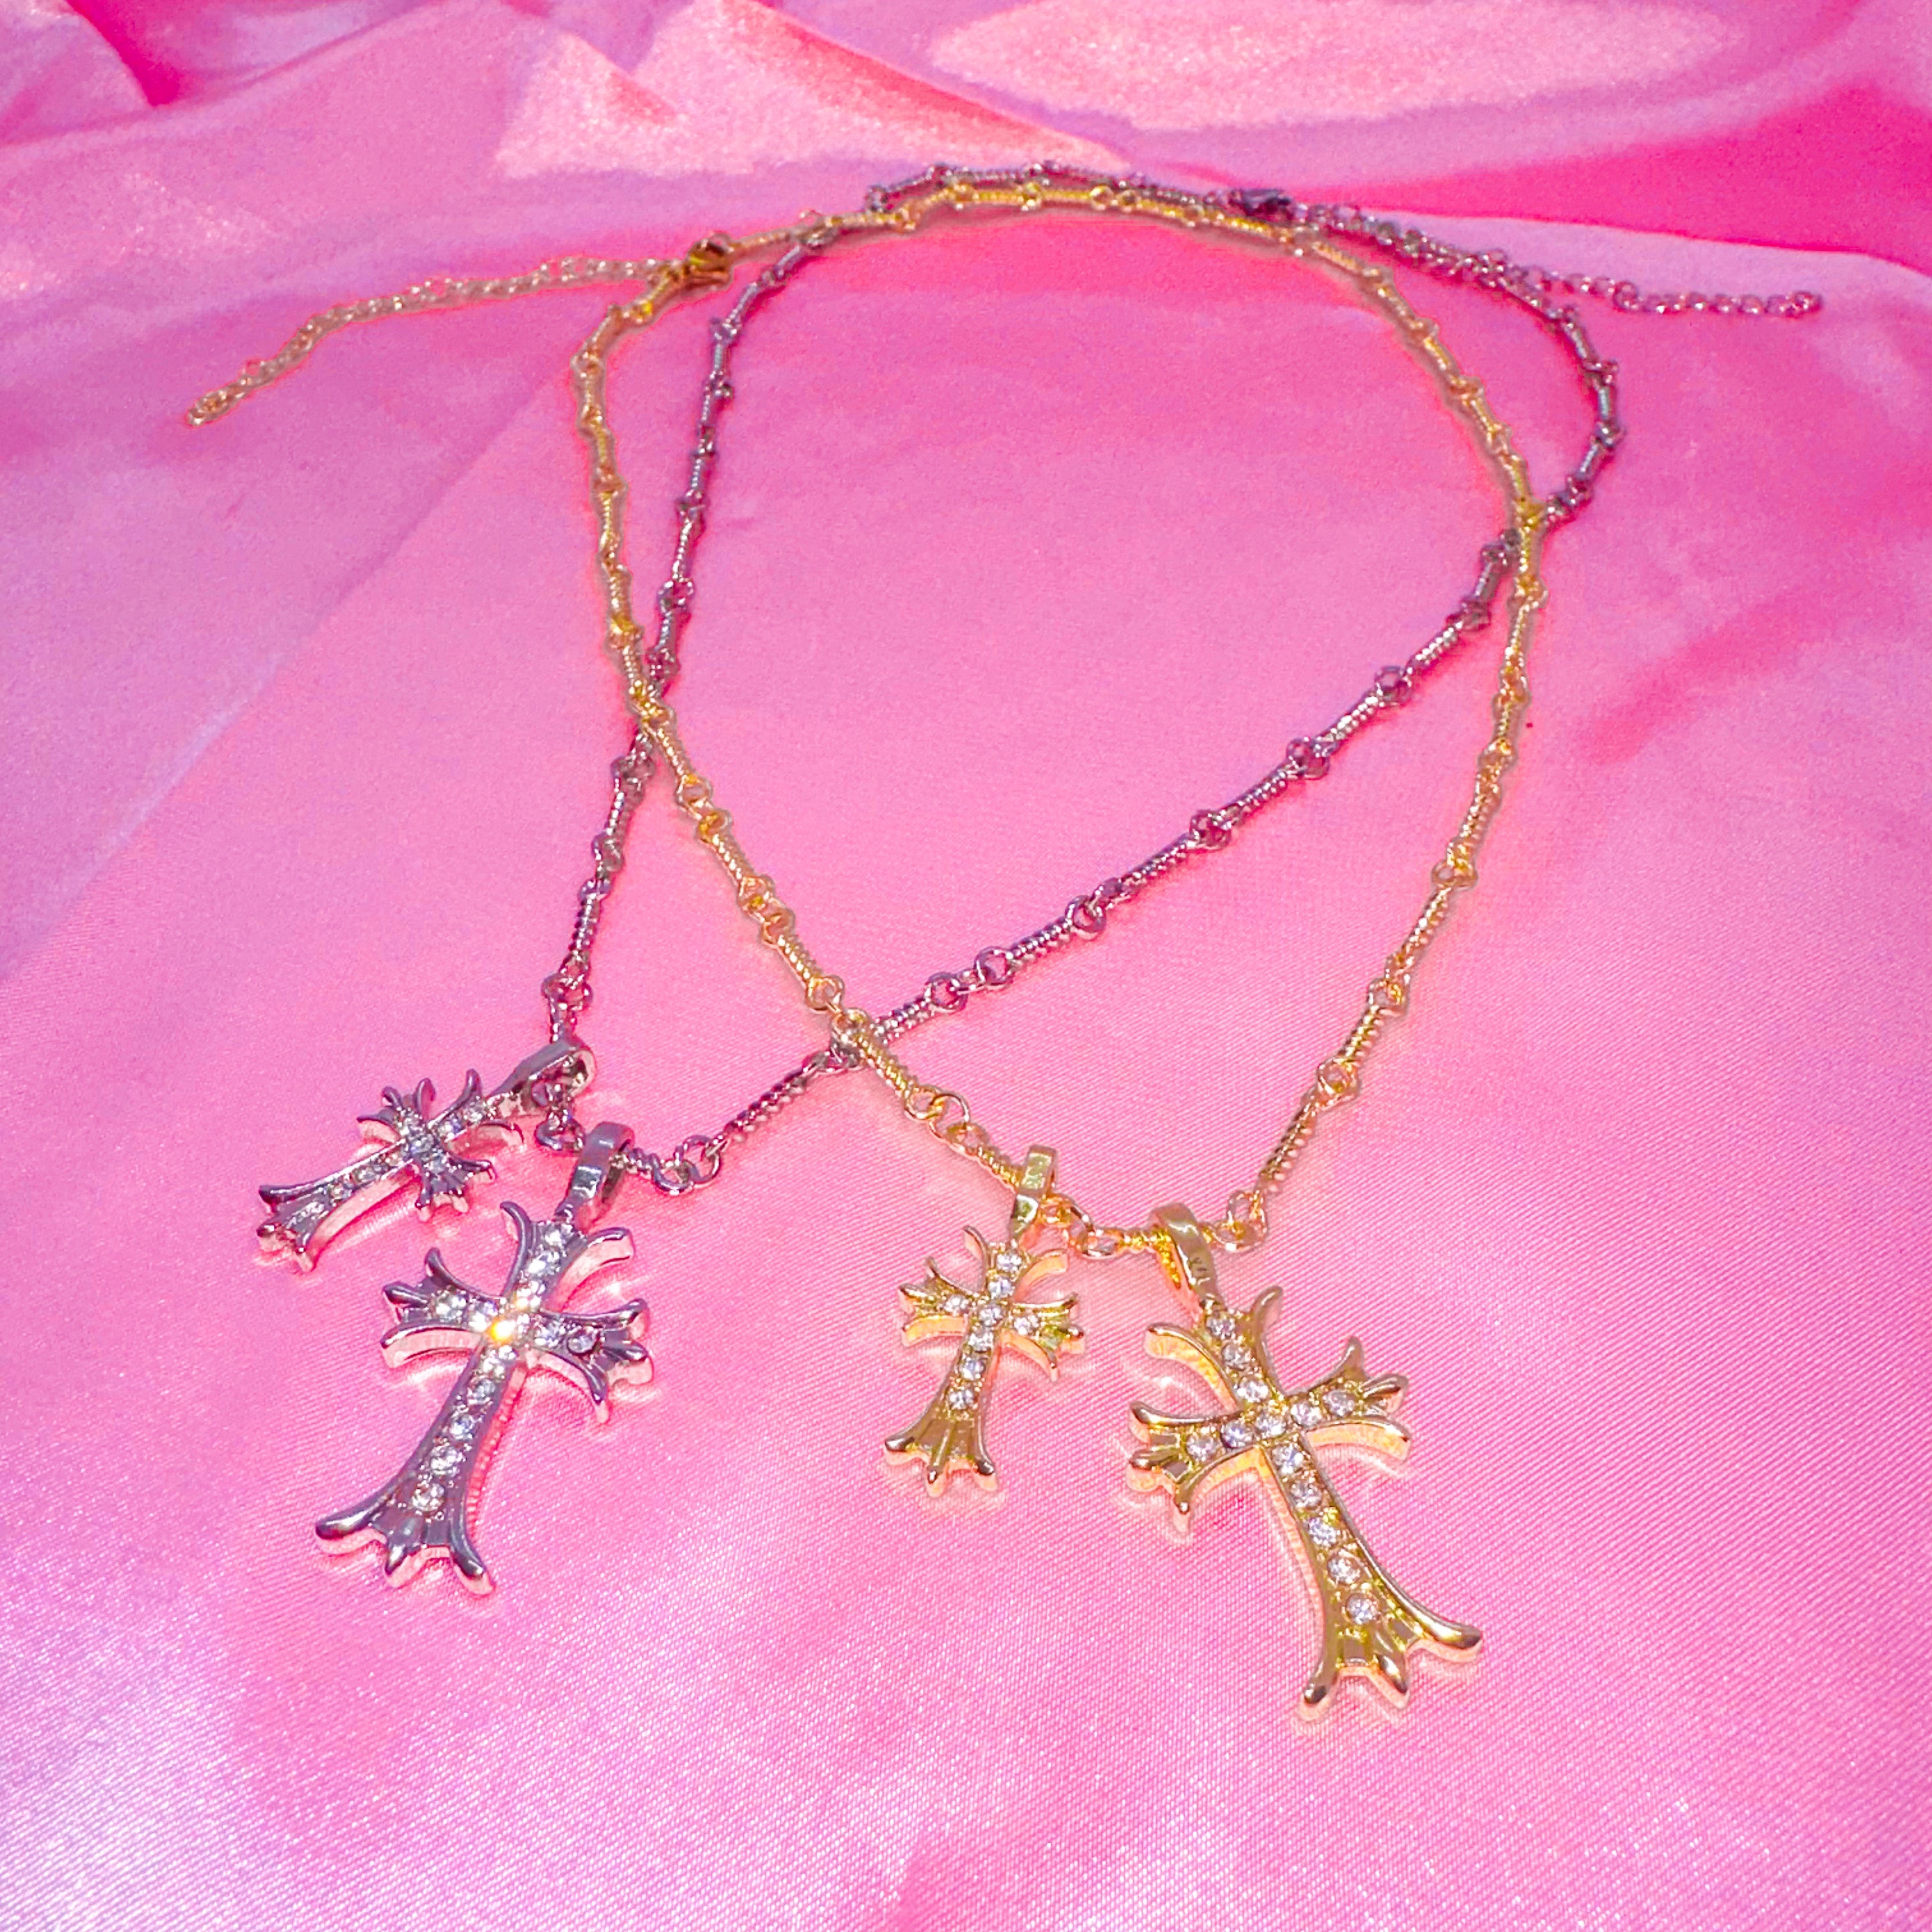 Icon Cross Necklace